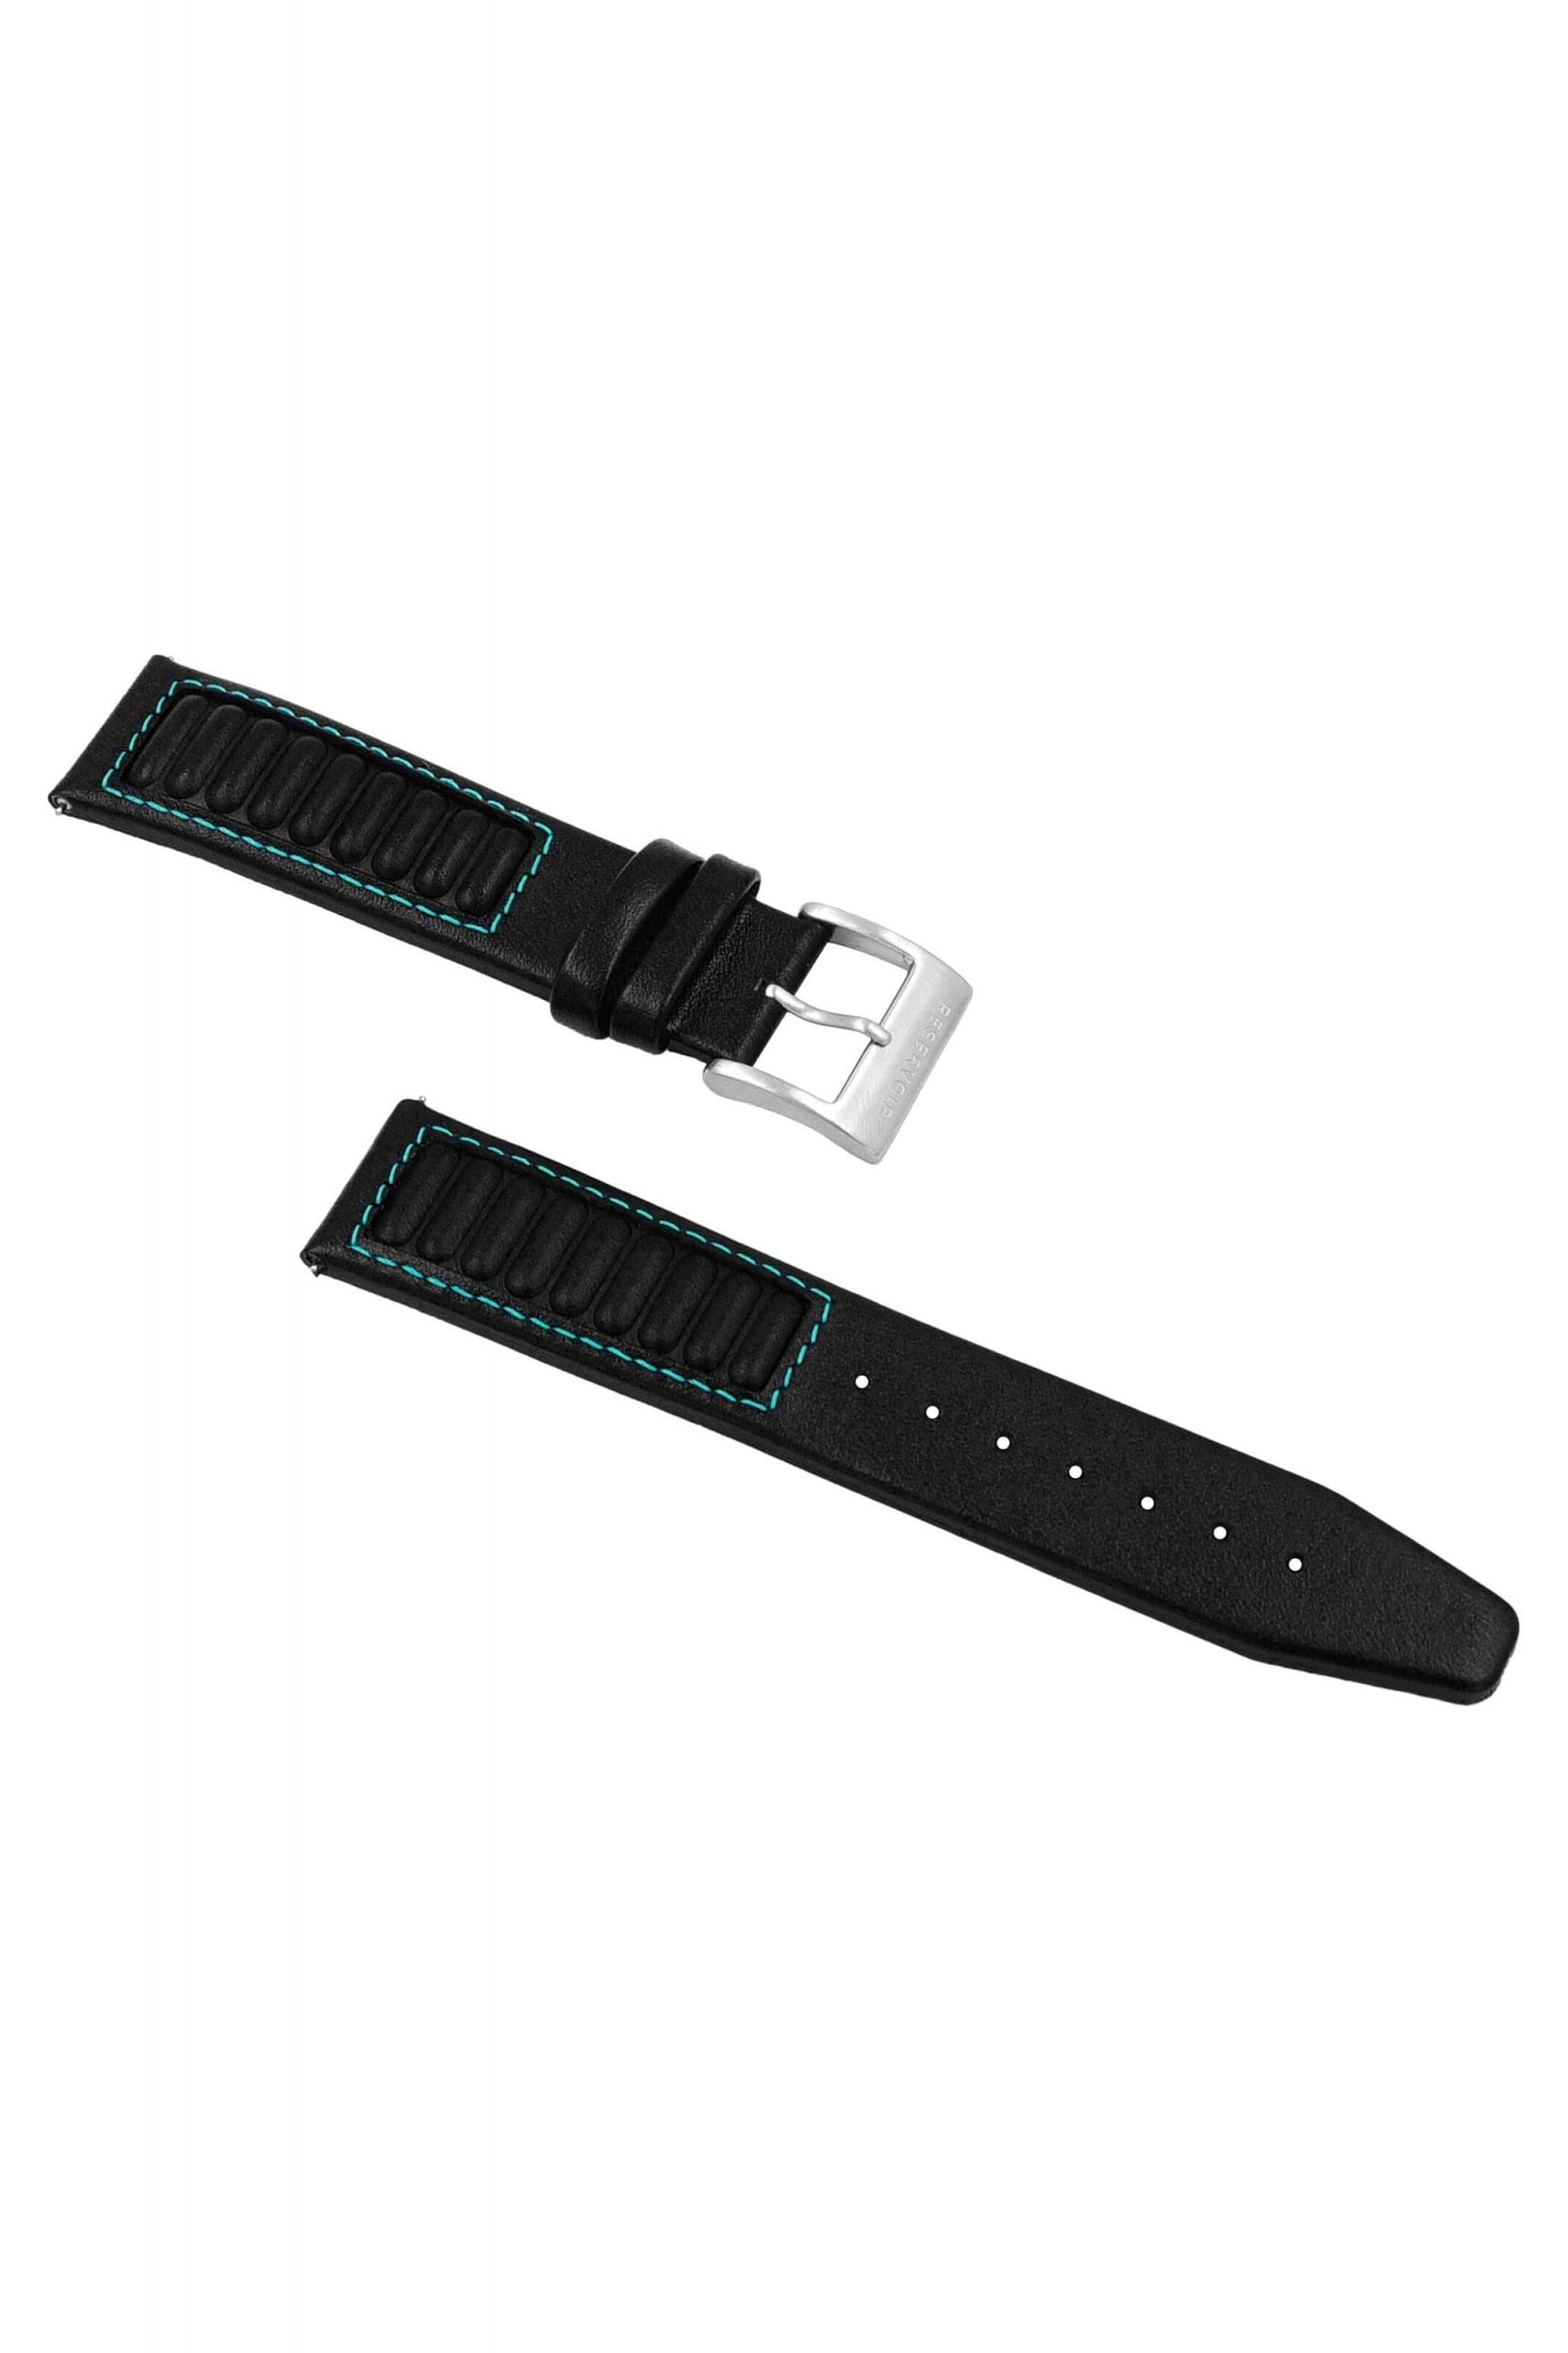 Dark black 356 Porsche leather strap with light grey and light teal accents.